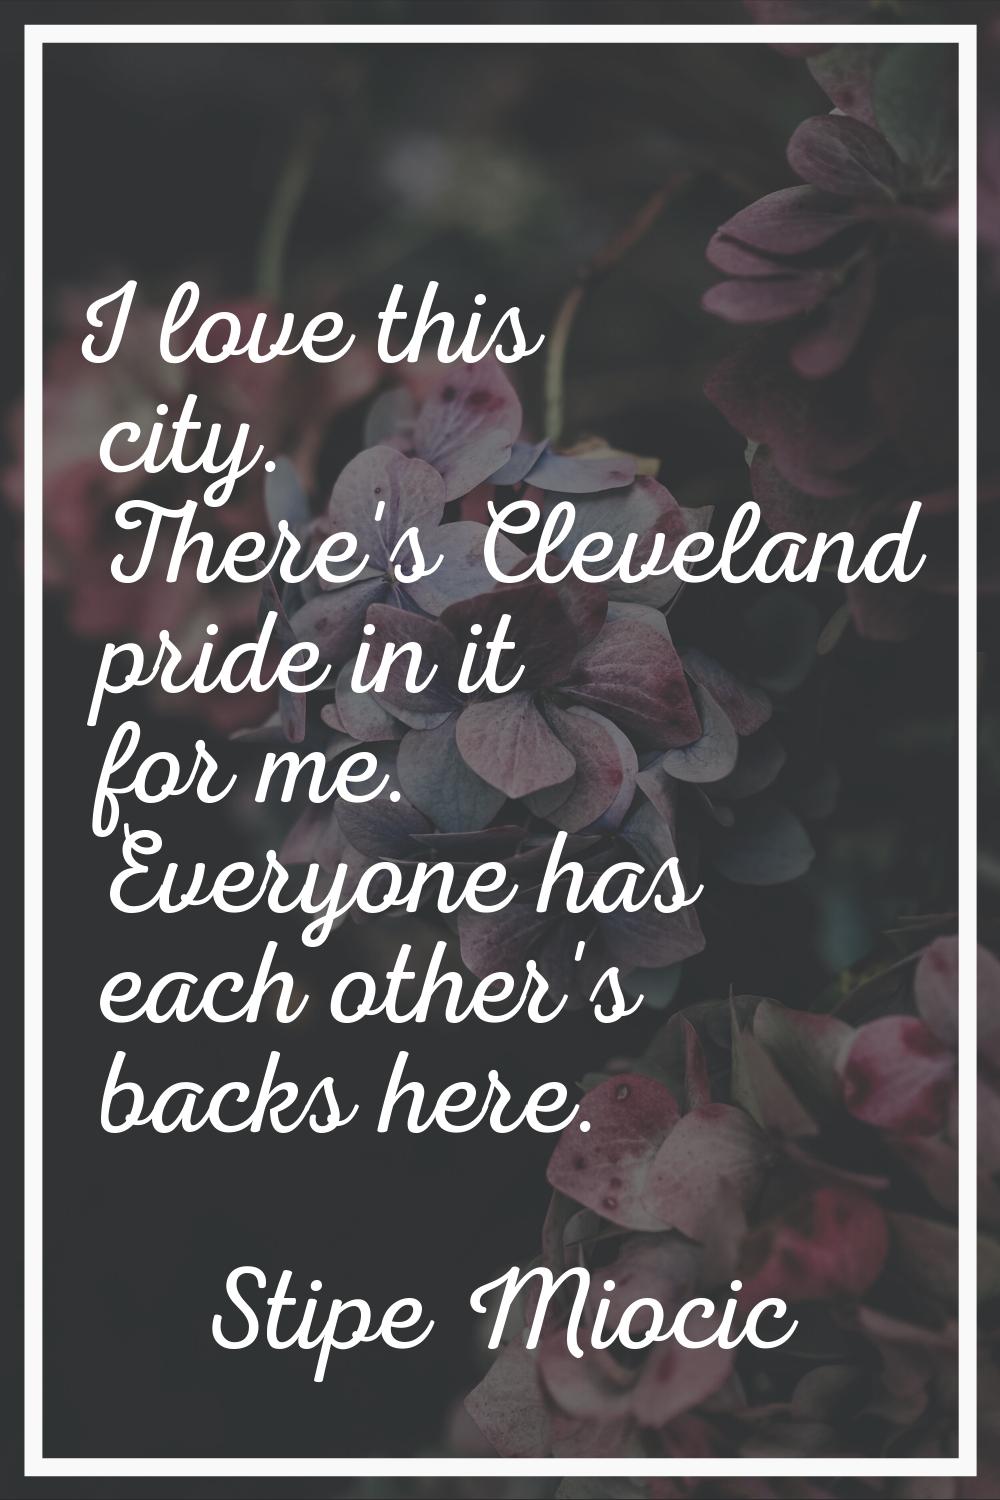 I love this city. There's Cleveland pride in it for me. Everyone has each other's backs here.